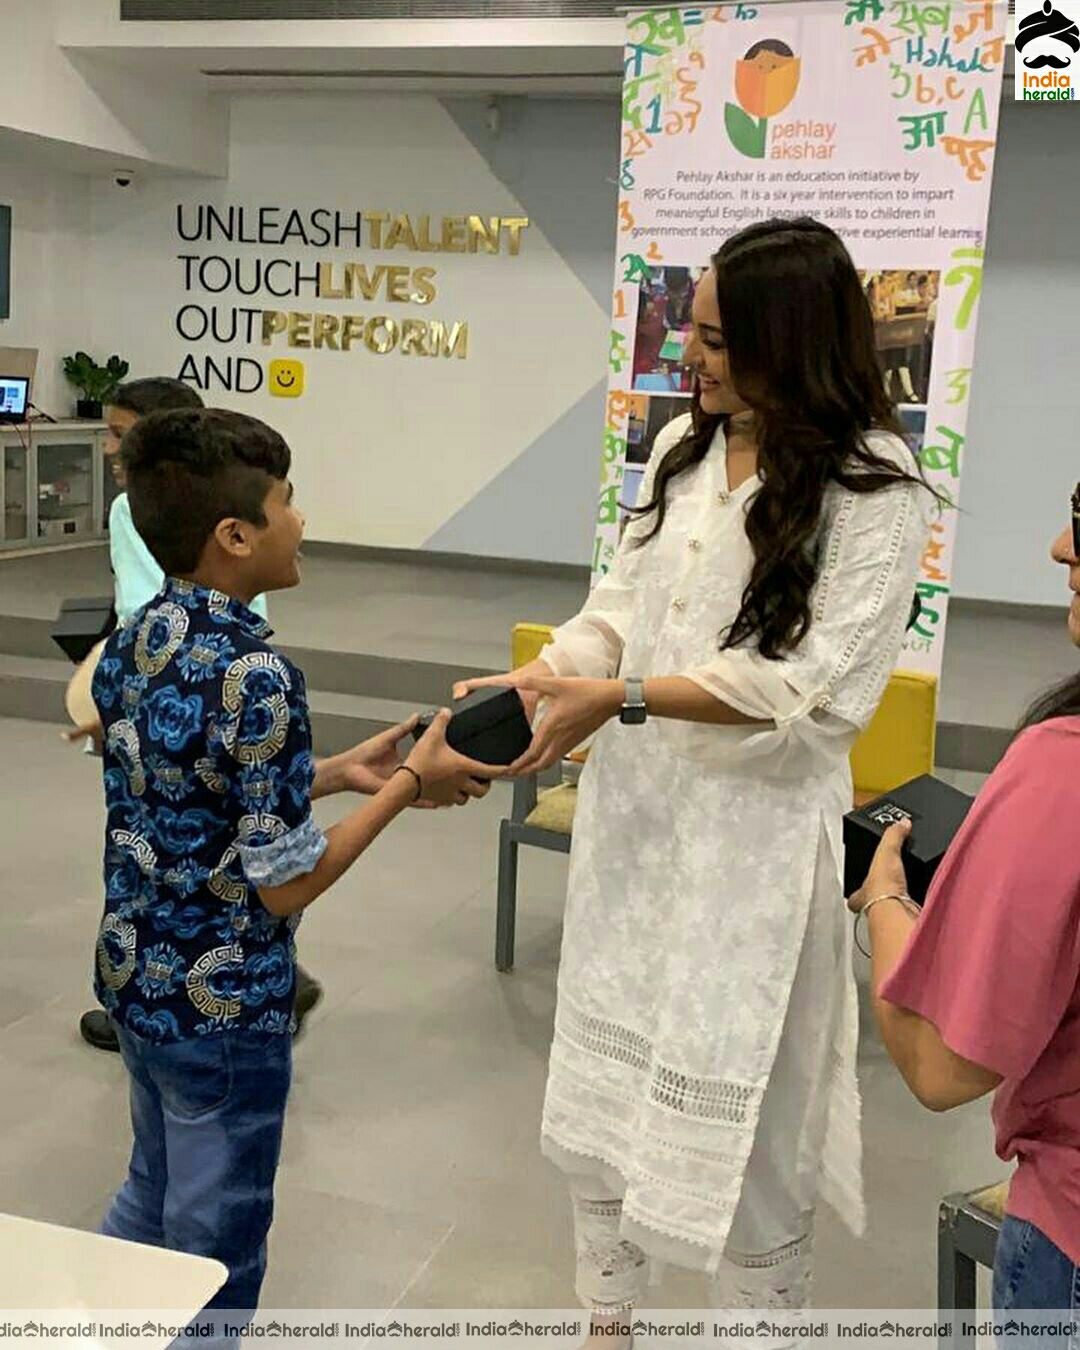 Sonakshi Sinha Bonded With Children At An NGO